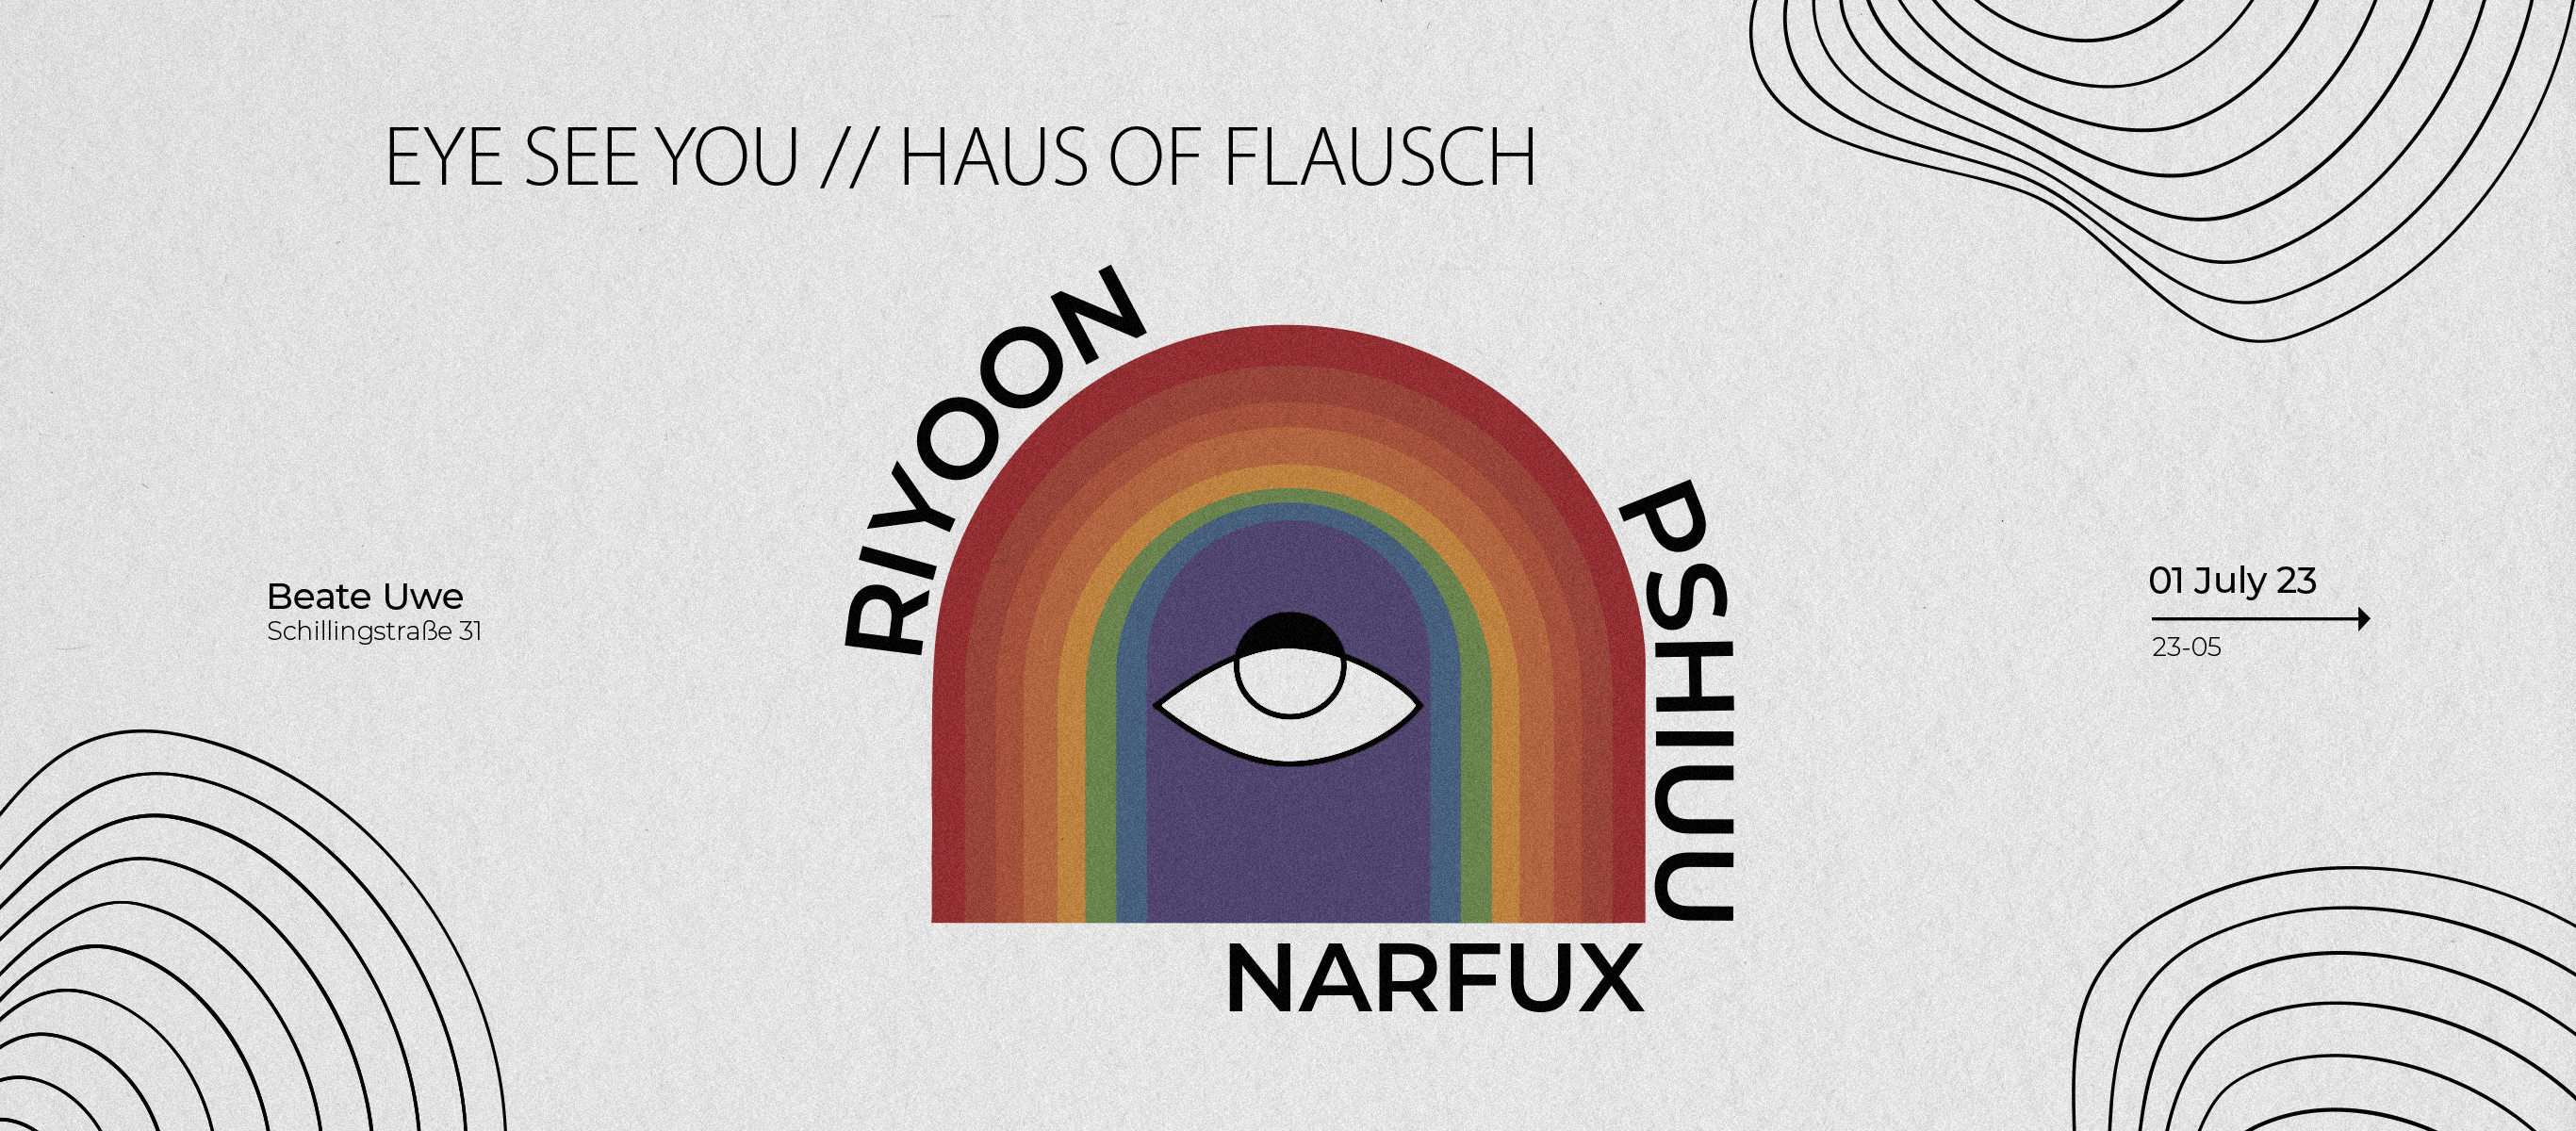 Eye See You // Haus of Flausch - Página frontal